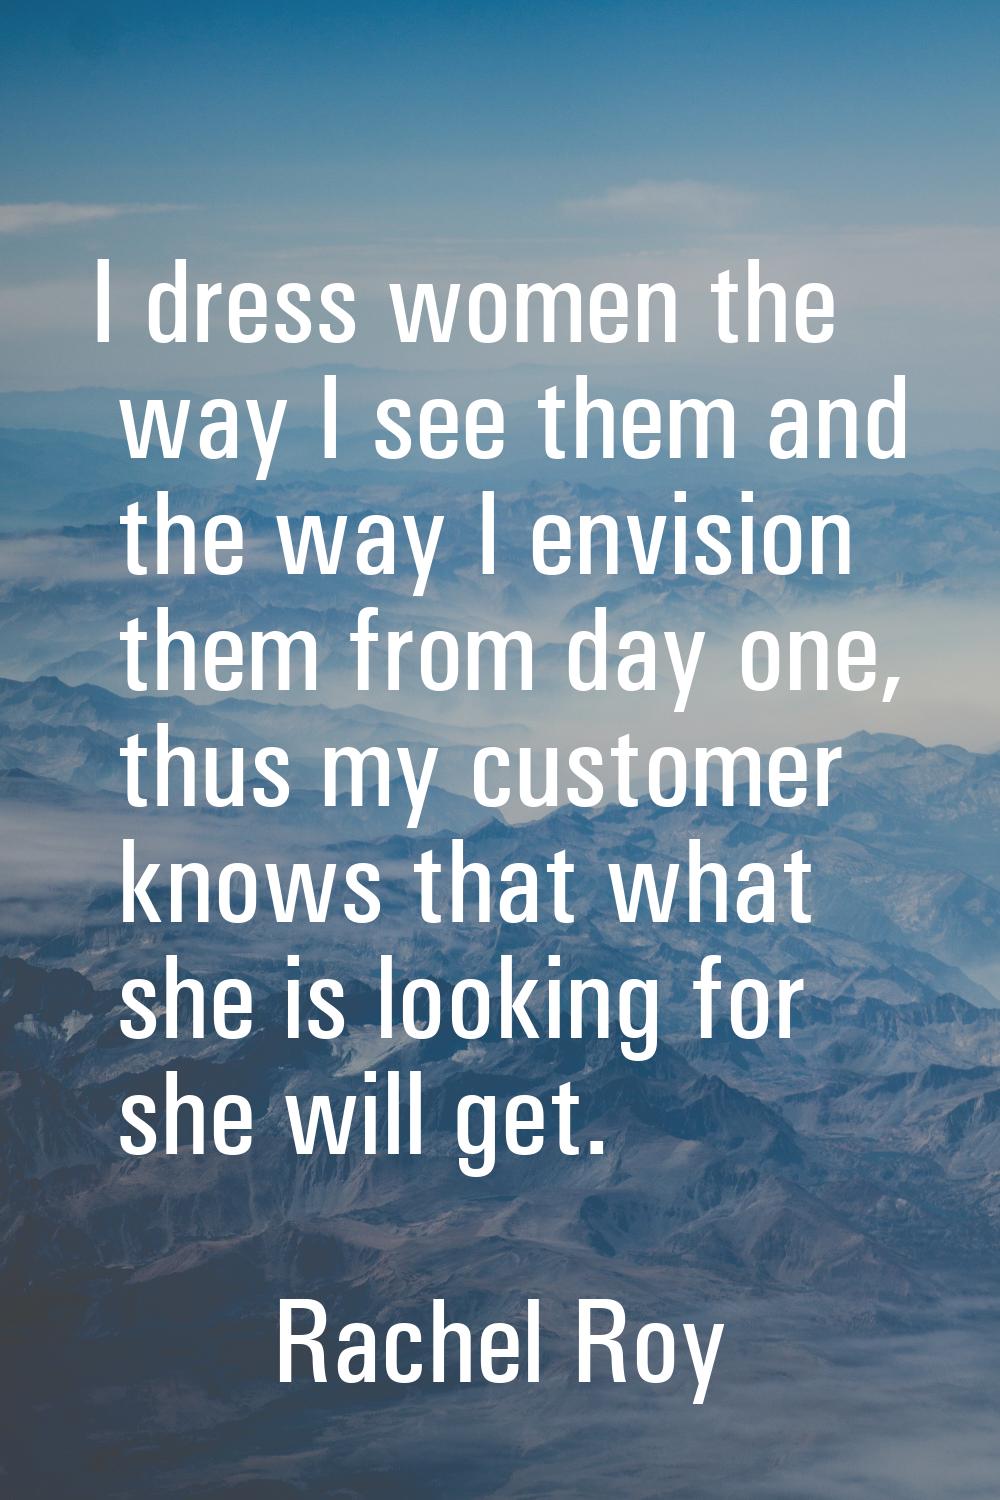 I dress women the way I see them and the way I envision them from day one, thus my customer knows t